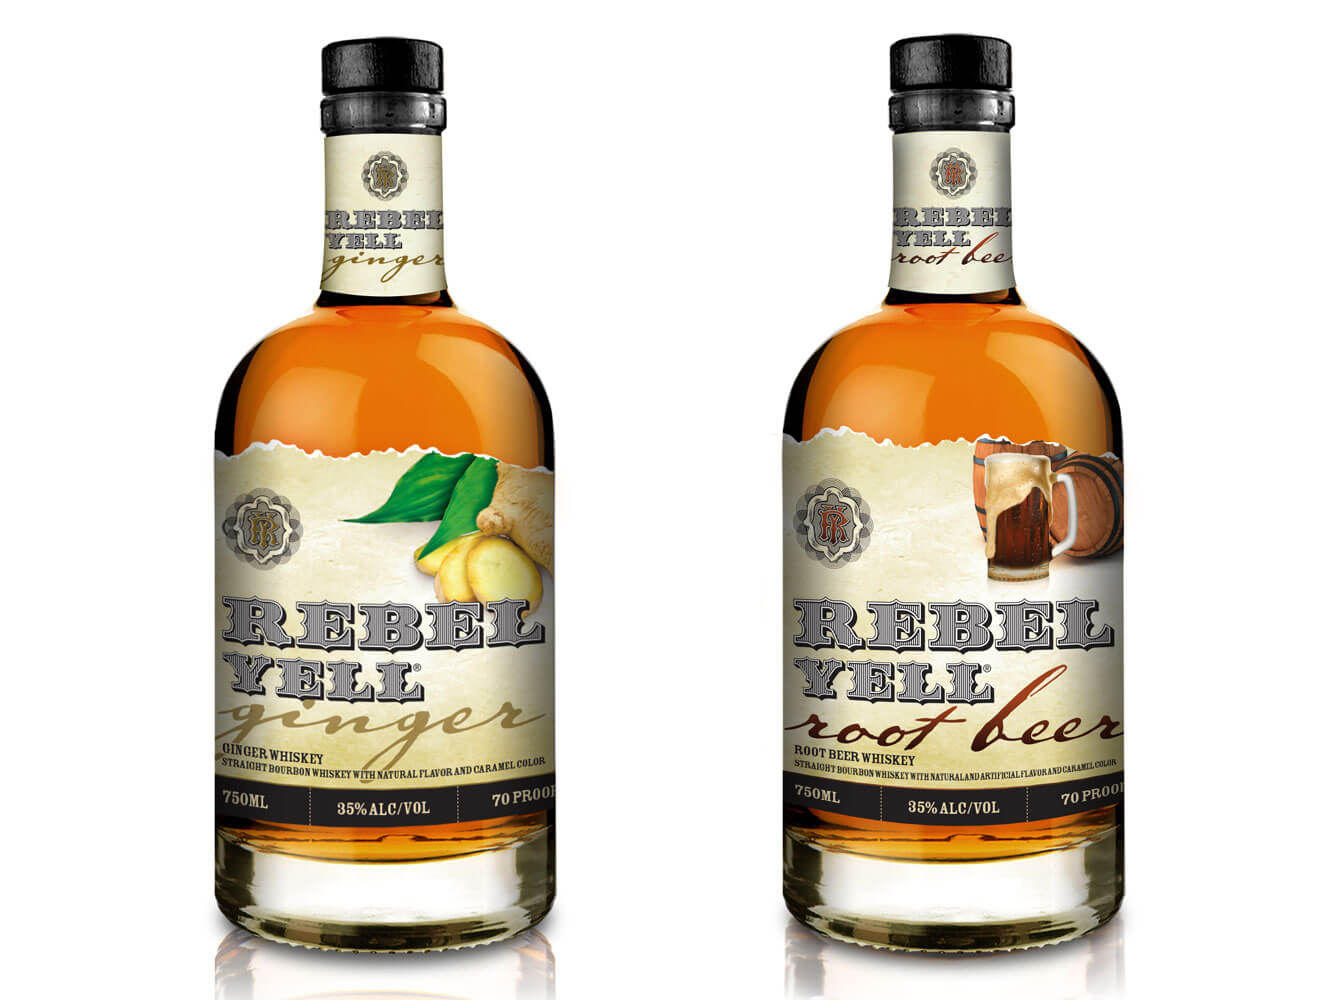 Rebel Yell Bourbon Introduces New Flavors, Ginger and Root Beer, featured brands